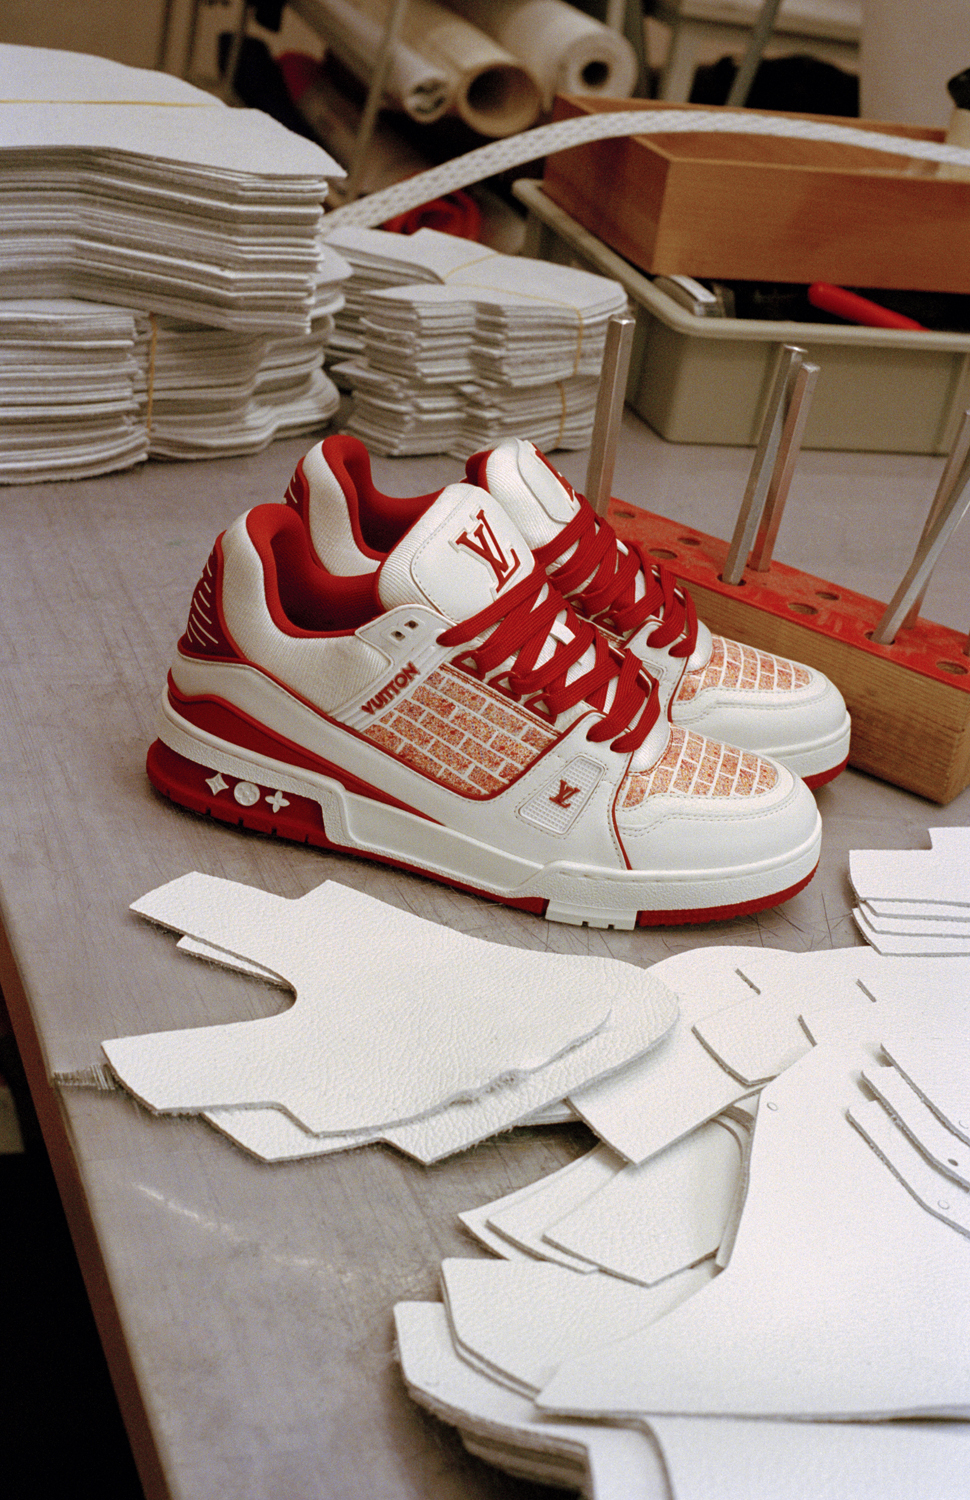 LOUIS VUITTON “WHITE CANVAS: LV TRAINER IN RESIDENCE” THE EXHIBITION IN  MILAN UNTIL MARCH 16 - The Blonde Salad